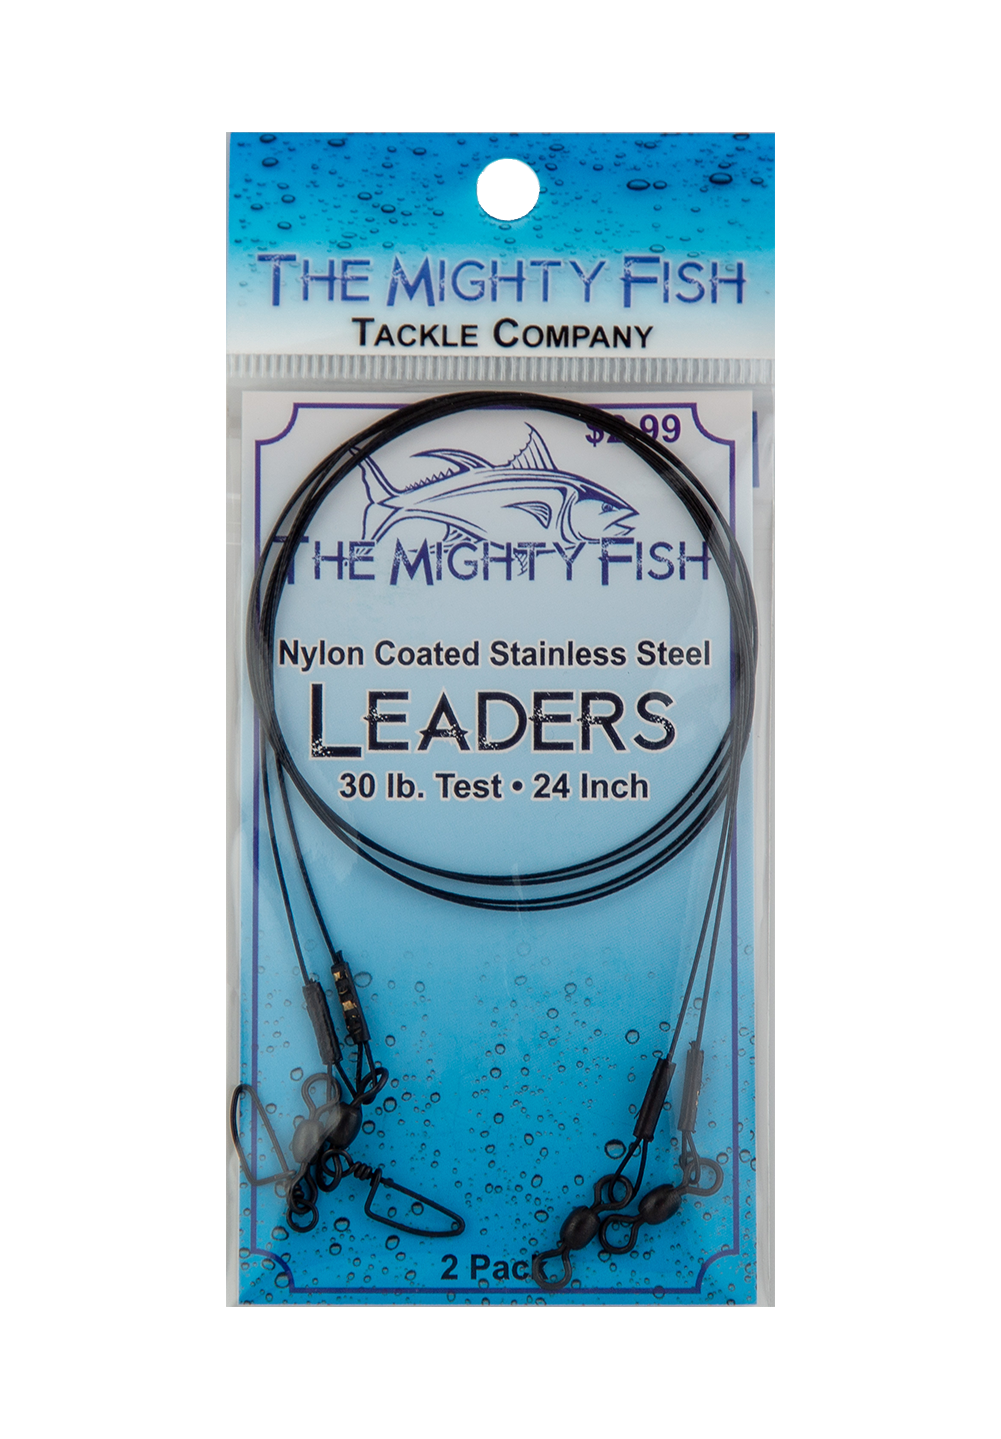 THE MIGHTY FISH TACKLE COMPANY WIRE LEADER